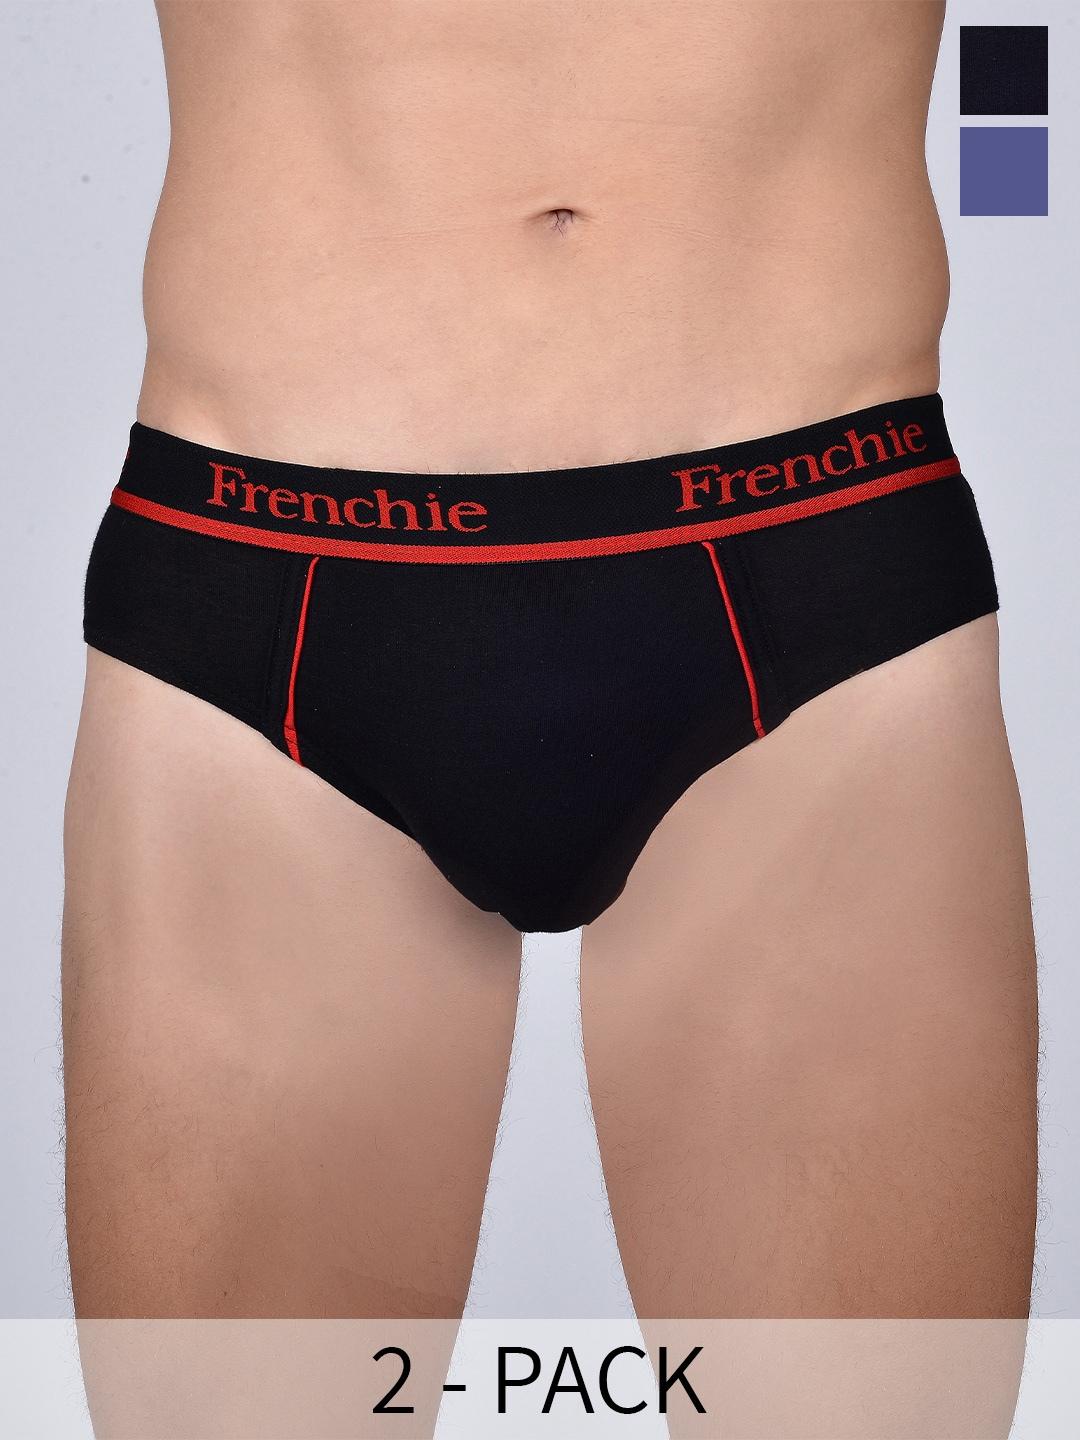 frenchie-pack-of-2-assorted-cotton-basic-briefs-fr-mi-bf-pro-10p-95-po2